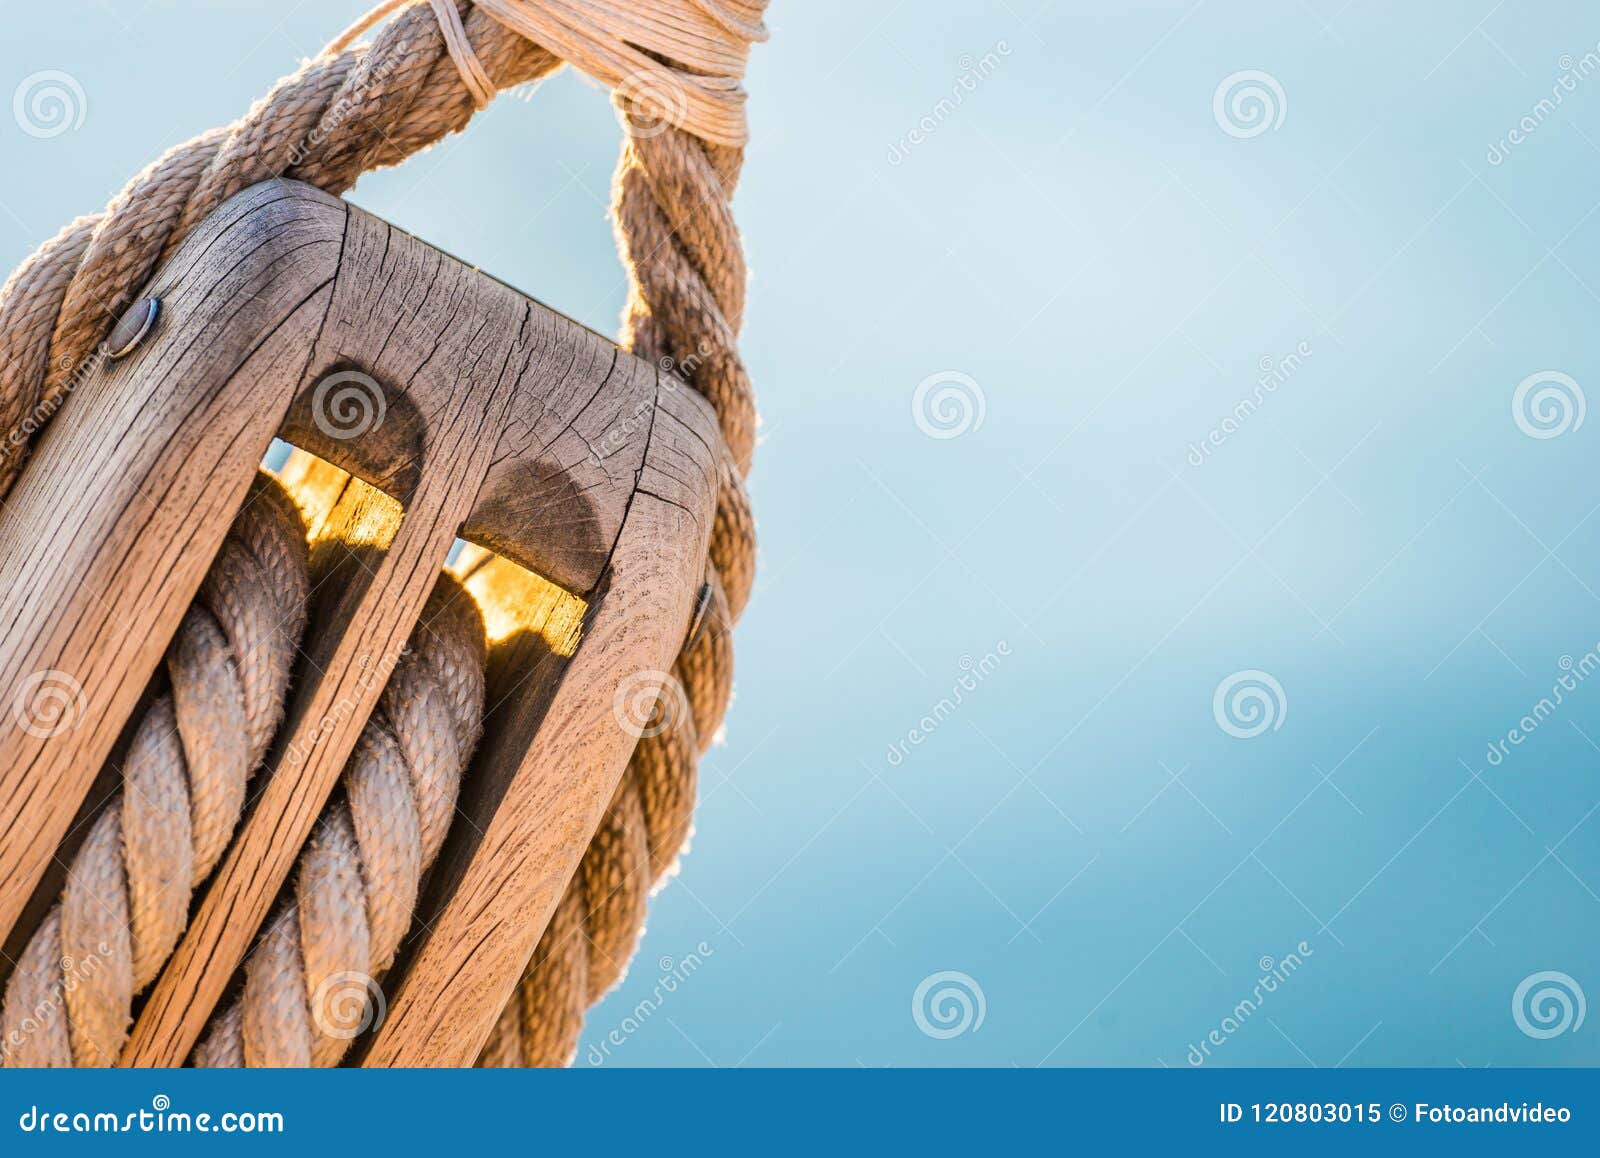 Rigging, Maritime Scene, Close-up of Wooden Pulley with Nautical